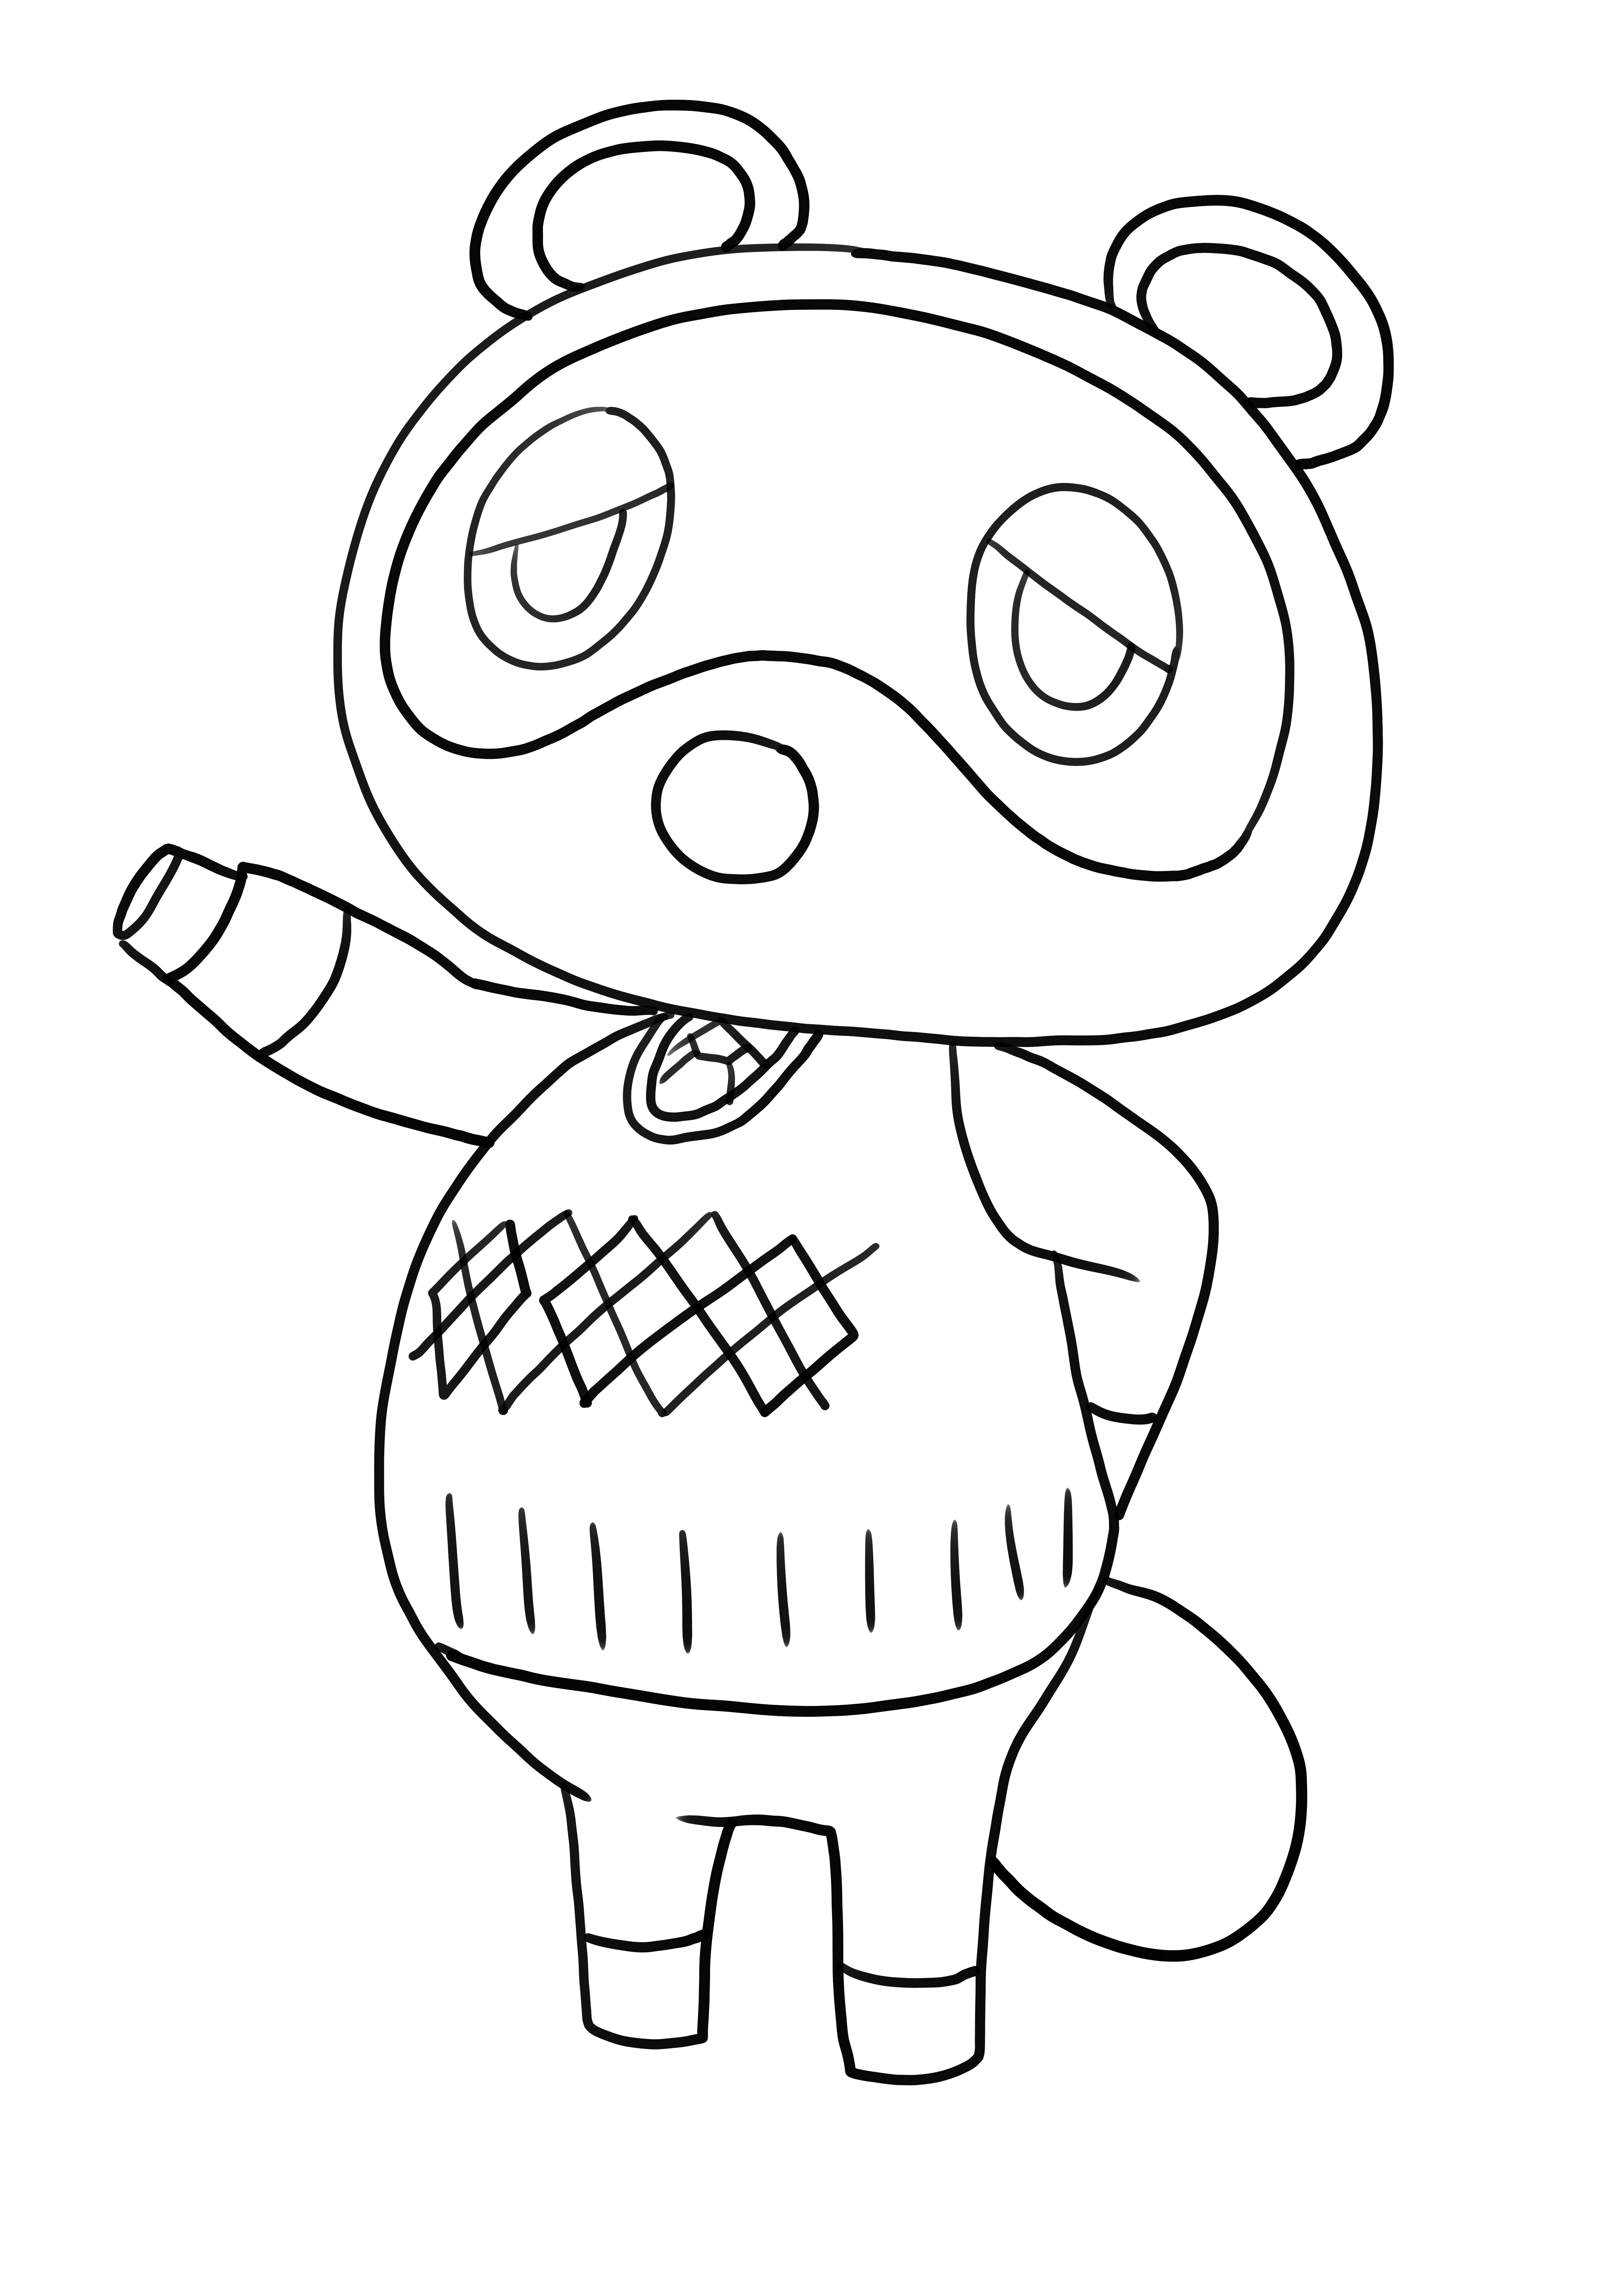 Tom Nook from Animal Crossing coloring page